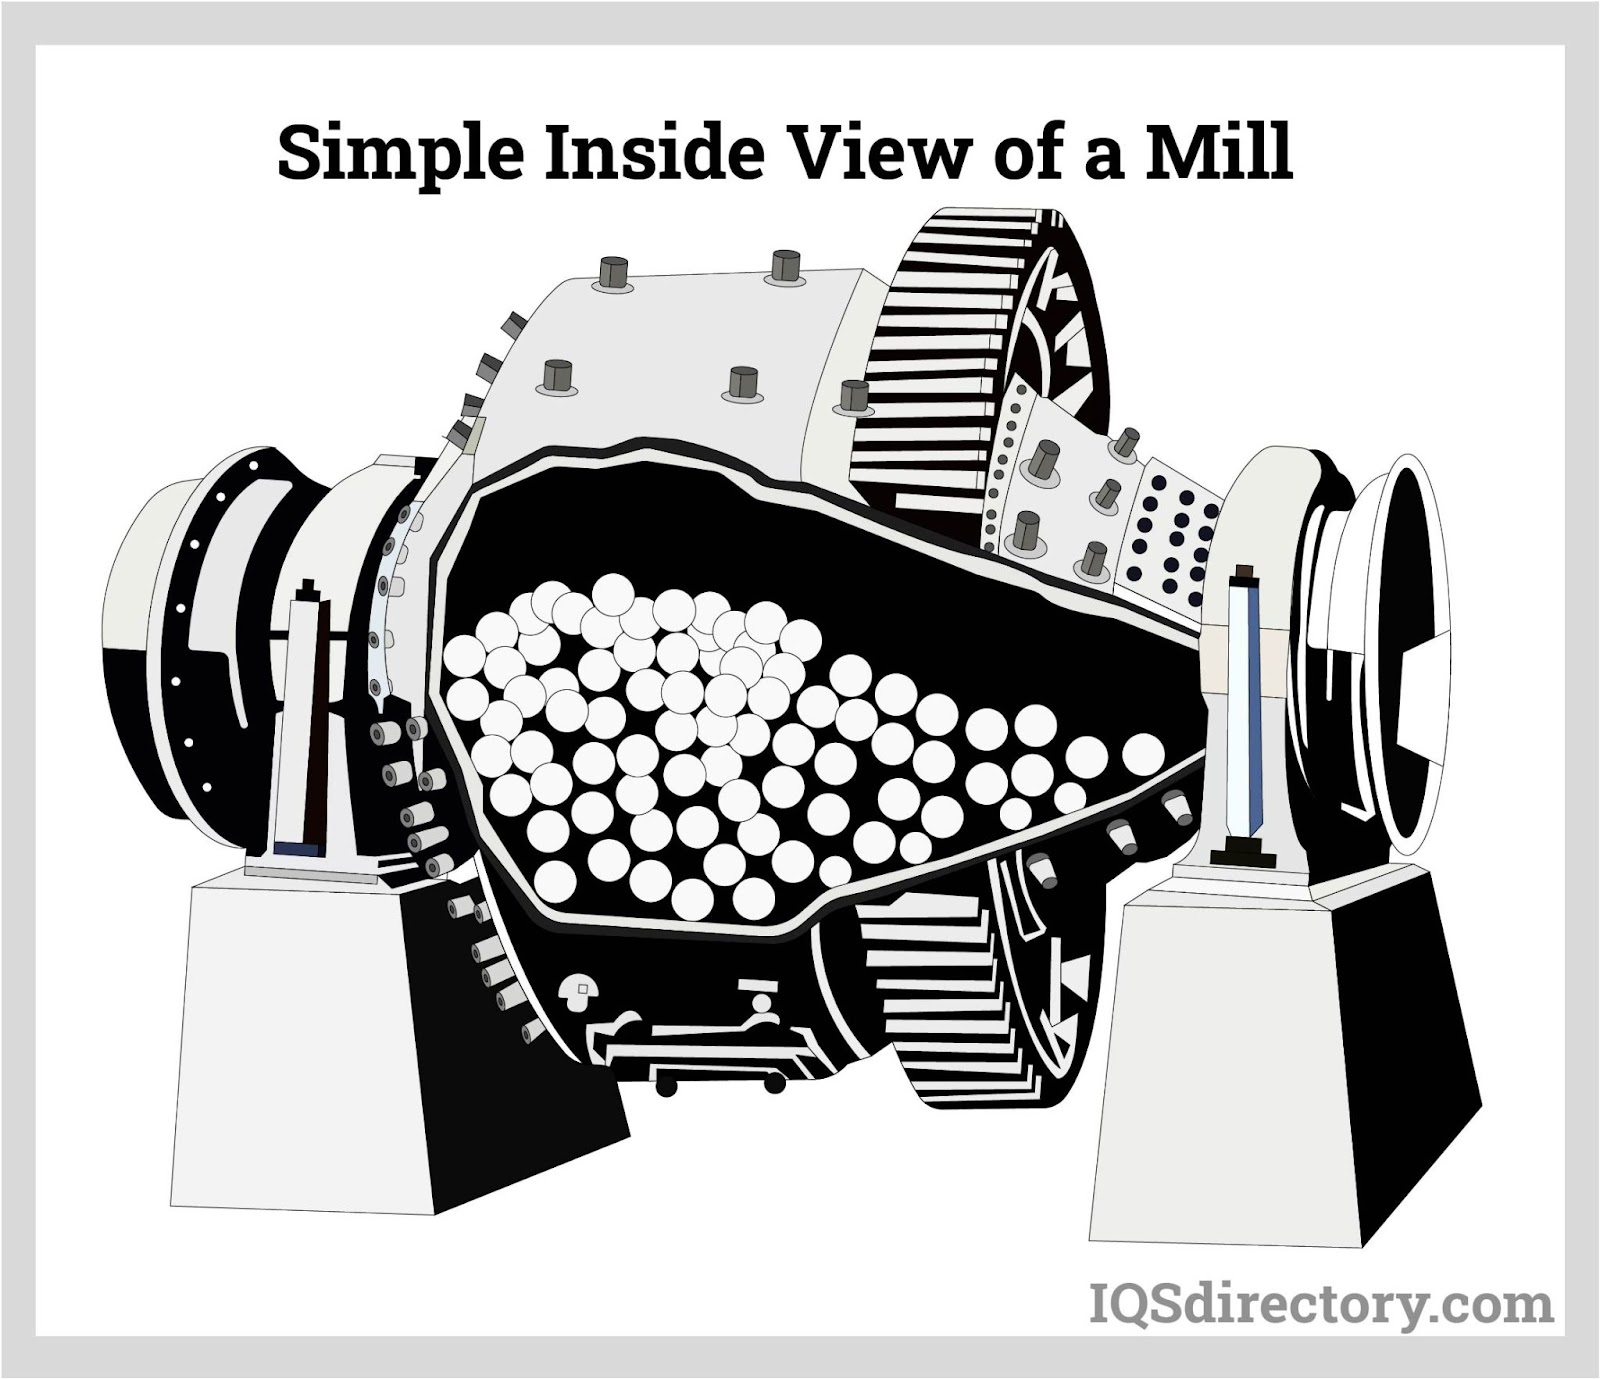 Simple Inside View of a Mill